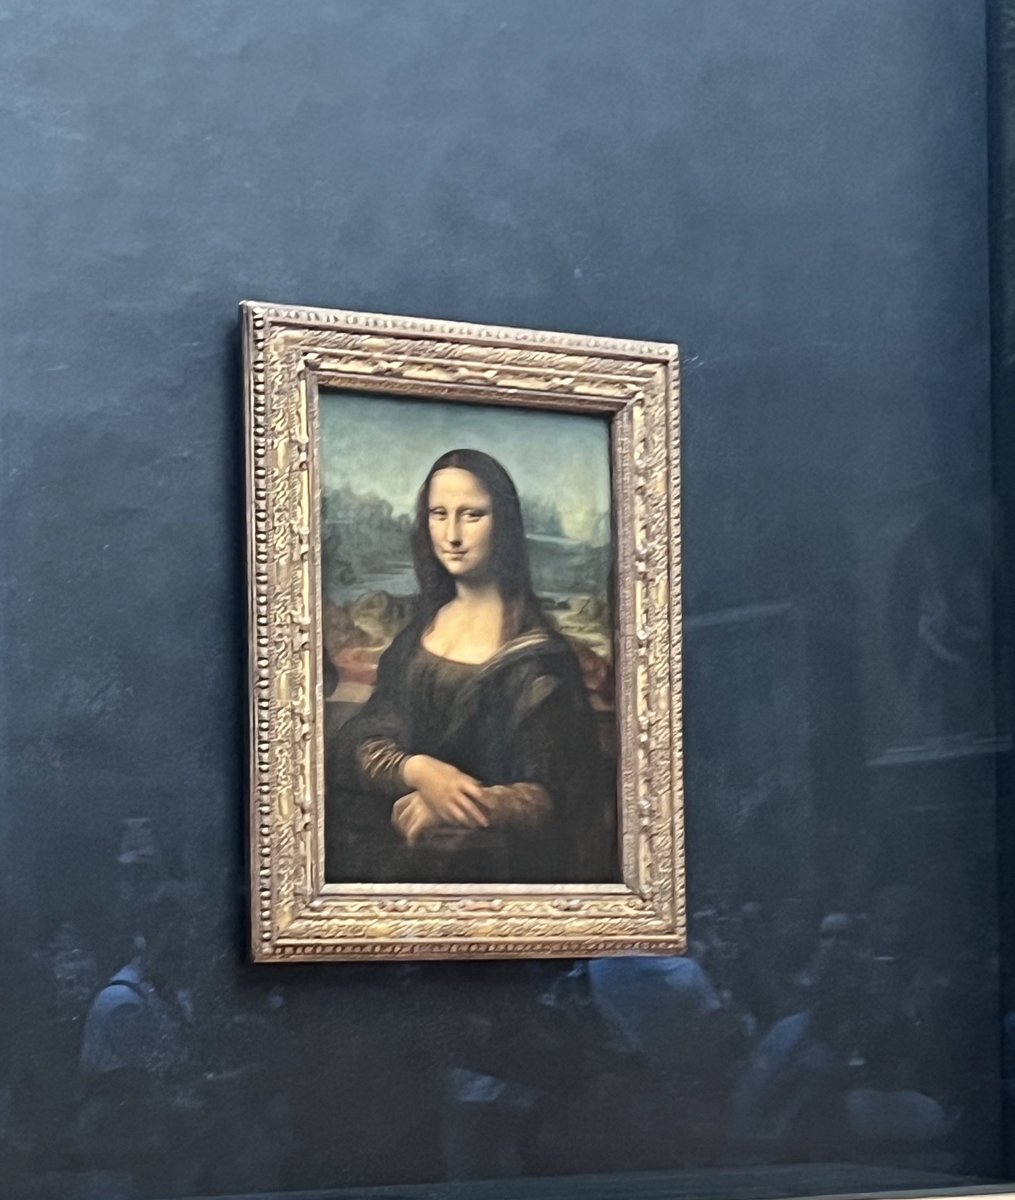 Definitely have a lot of FOMO seeing all the amazing @ISCTglobal evening events! But lucky enough to see this lovely lady tonight @ISCT_ESP #ISCT2023 #StudentLife #PhD #Monalisa #davinci #science